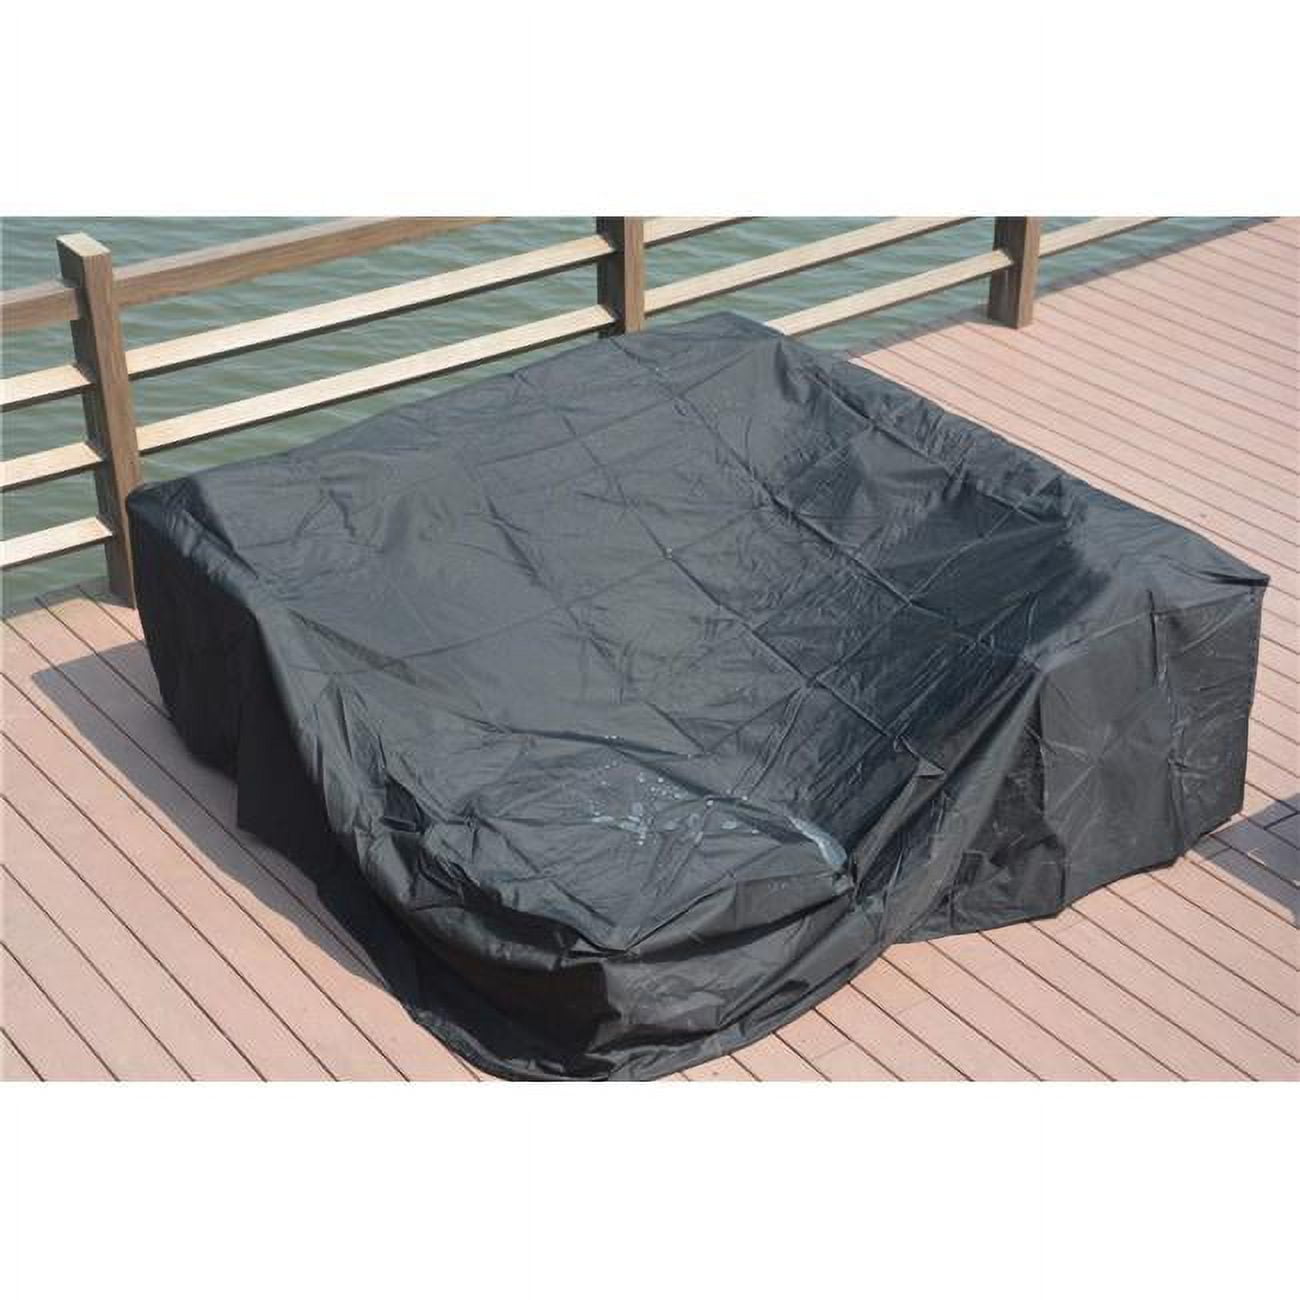 Rc-1402 Bambi Square Patio Dining & Sofa Set Cover, Black - 91 X 91 X 28 In.